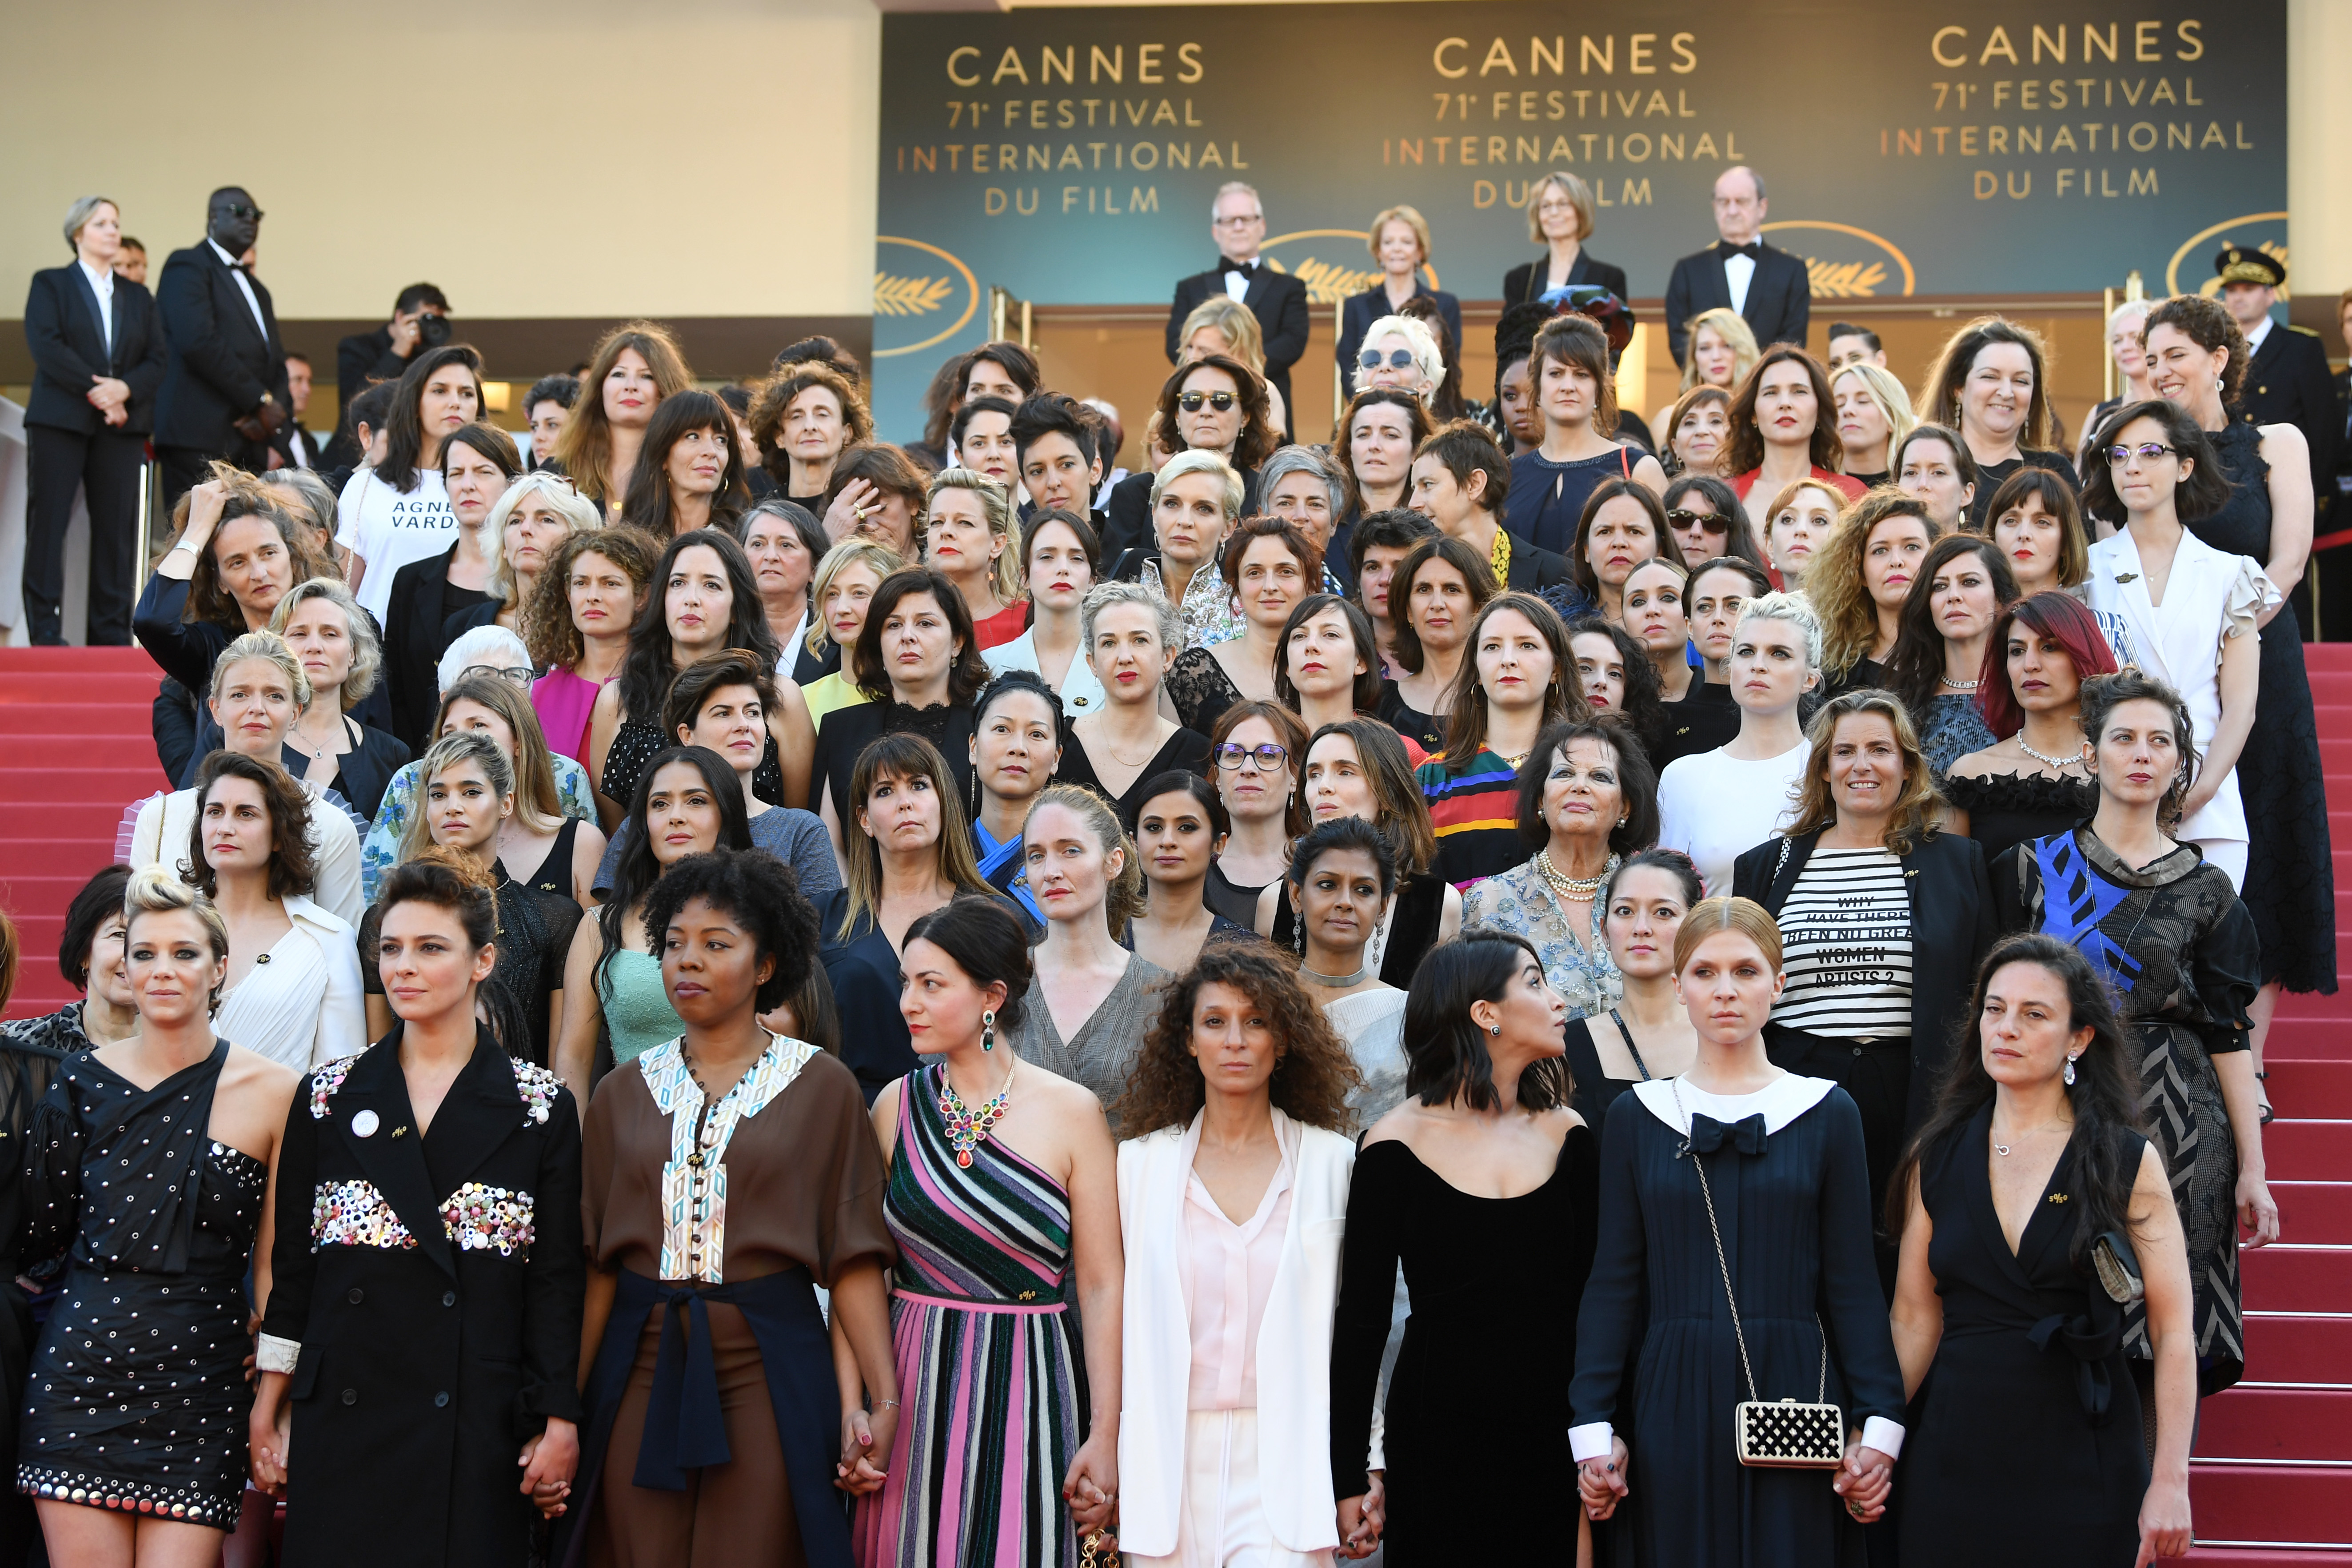 protesto-mulheres-cannes-2018